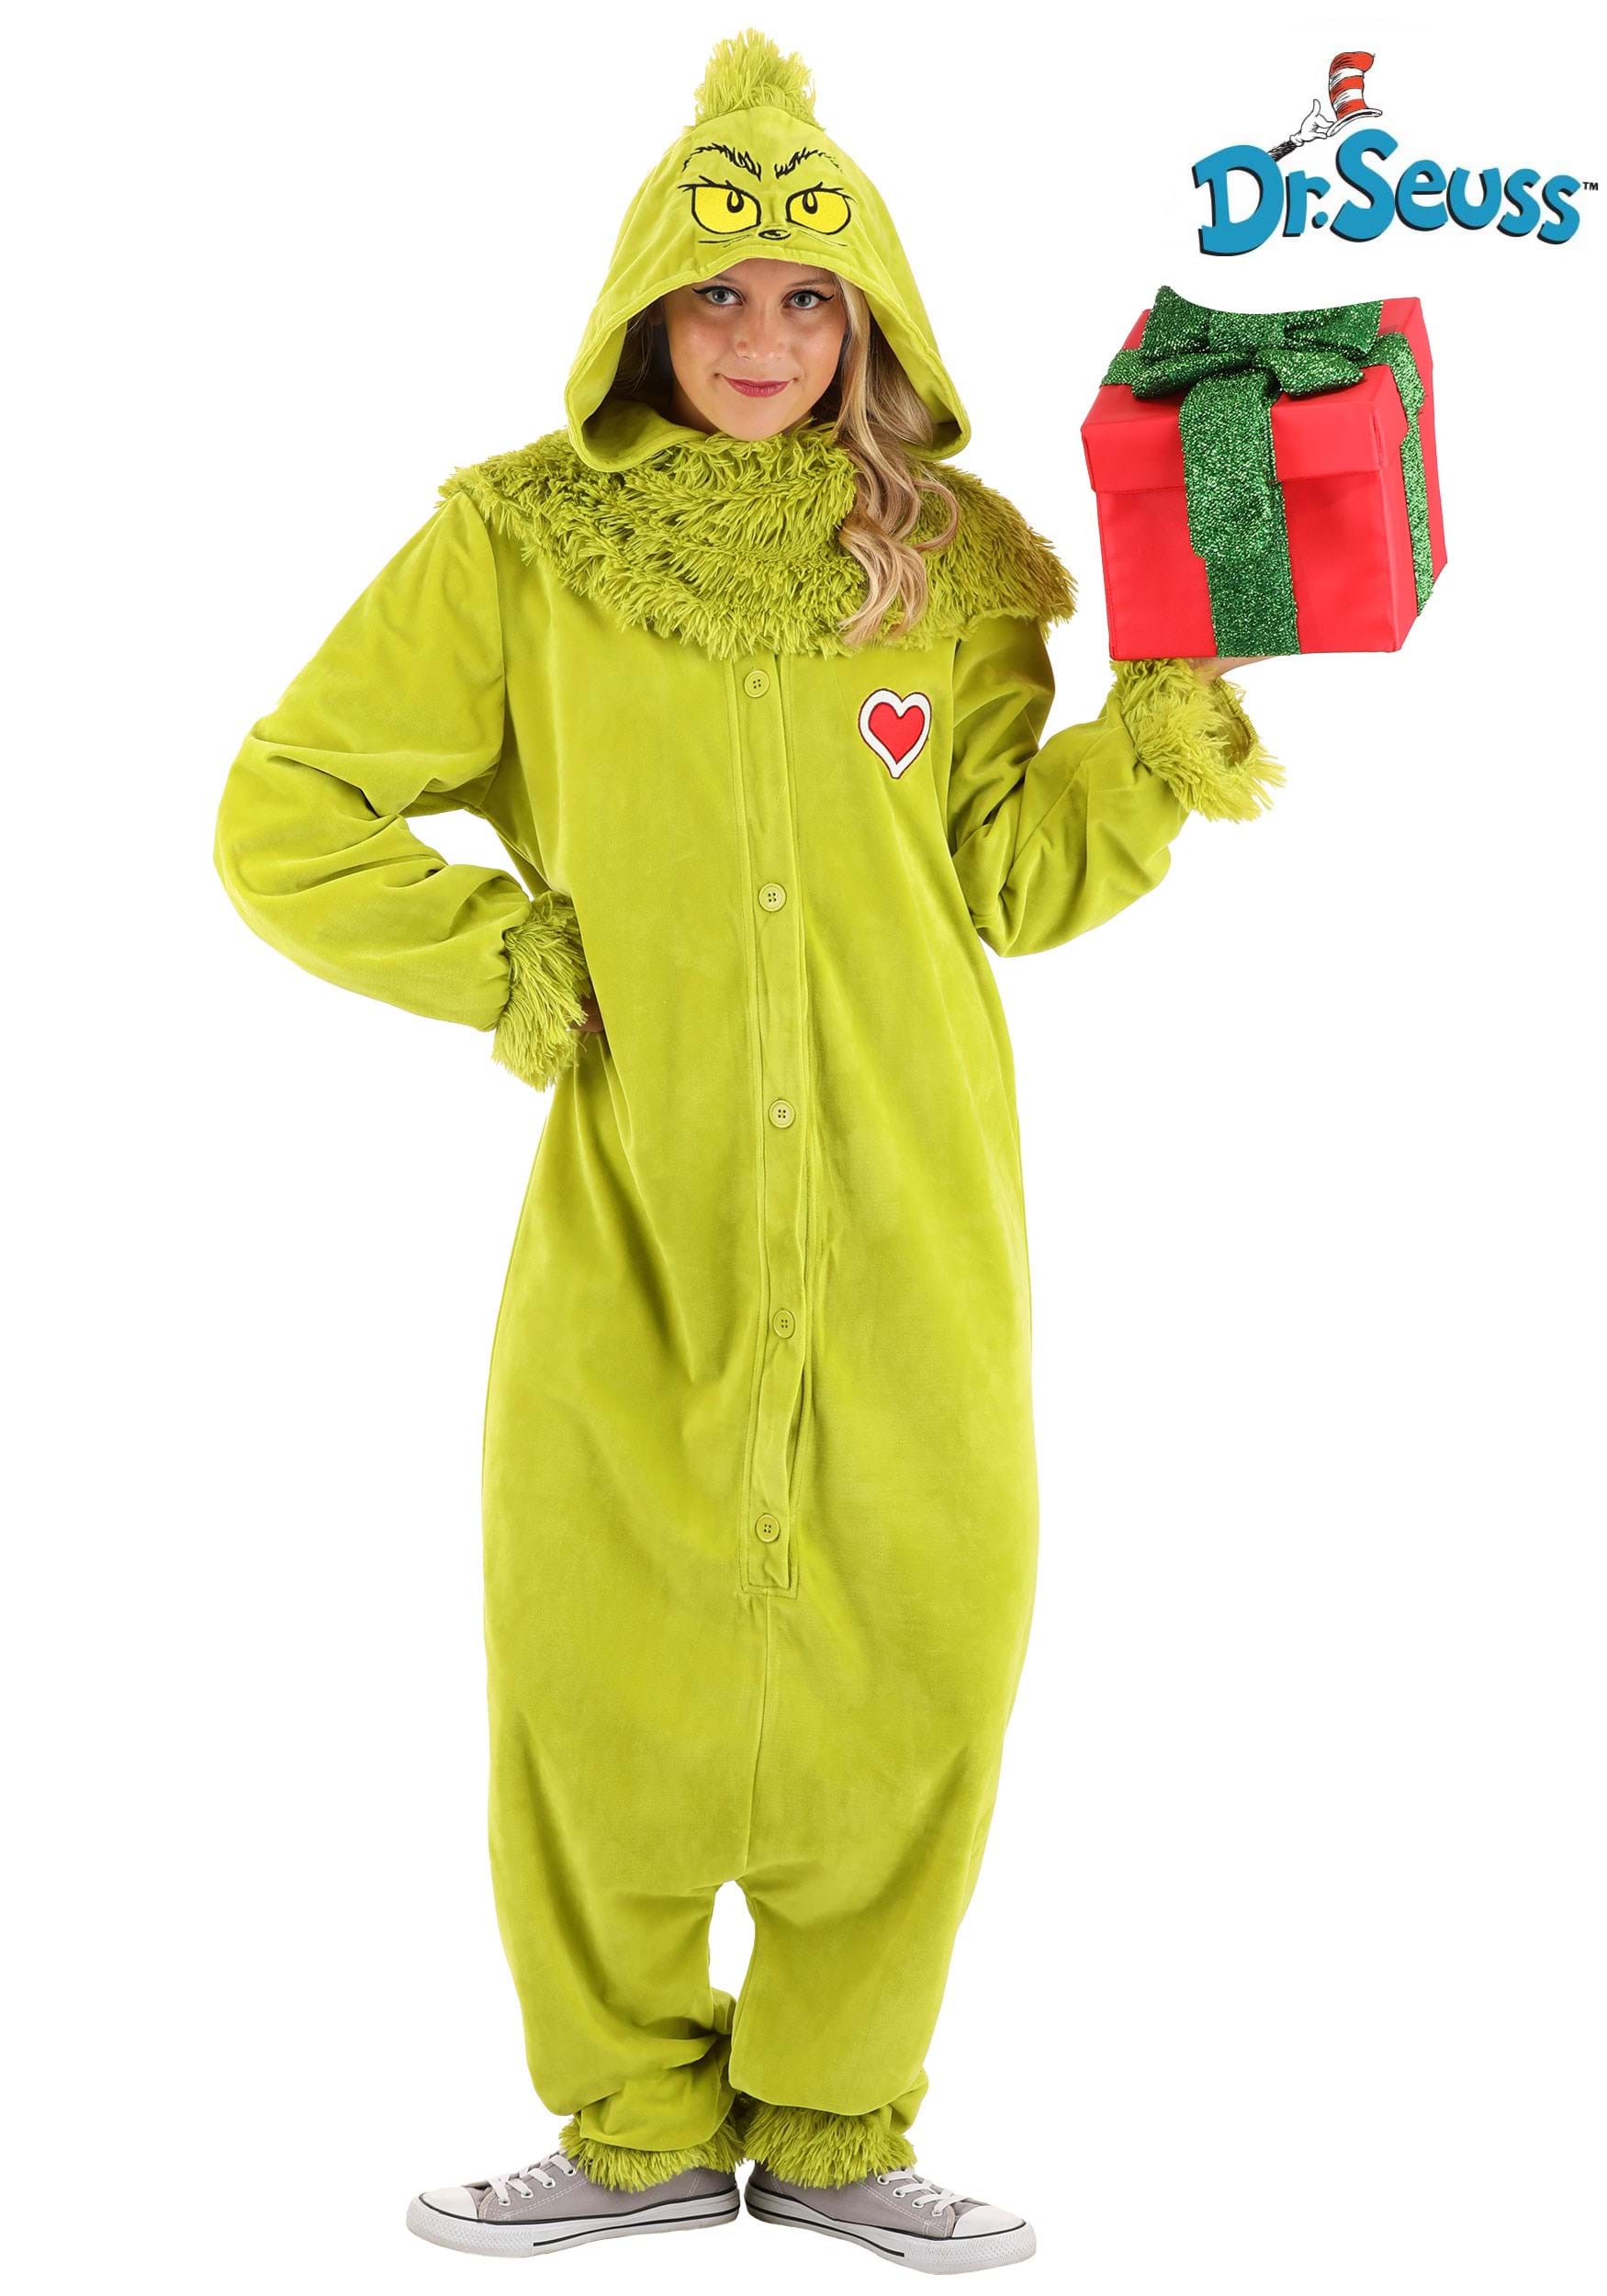 https://images.halloween.com/products/86361/1-1/the-grinch-jumpsuit-costume-adult-0.jpg